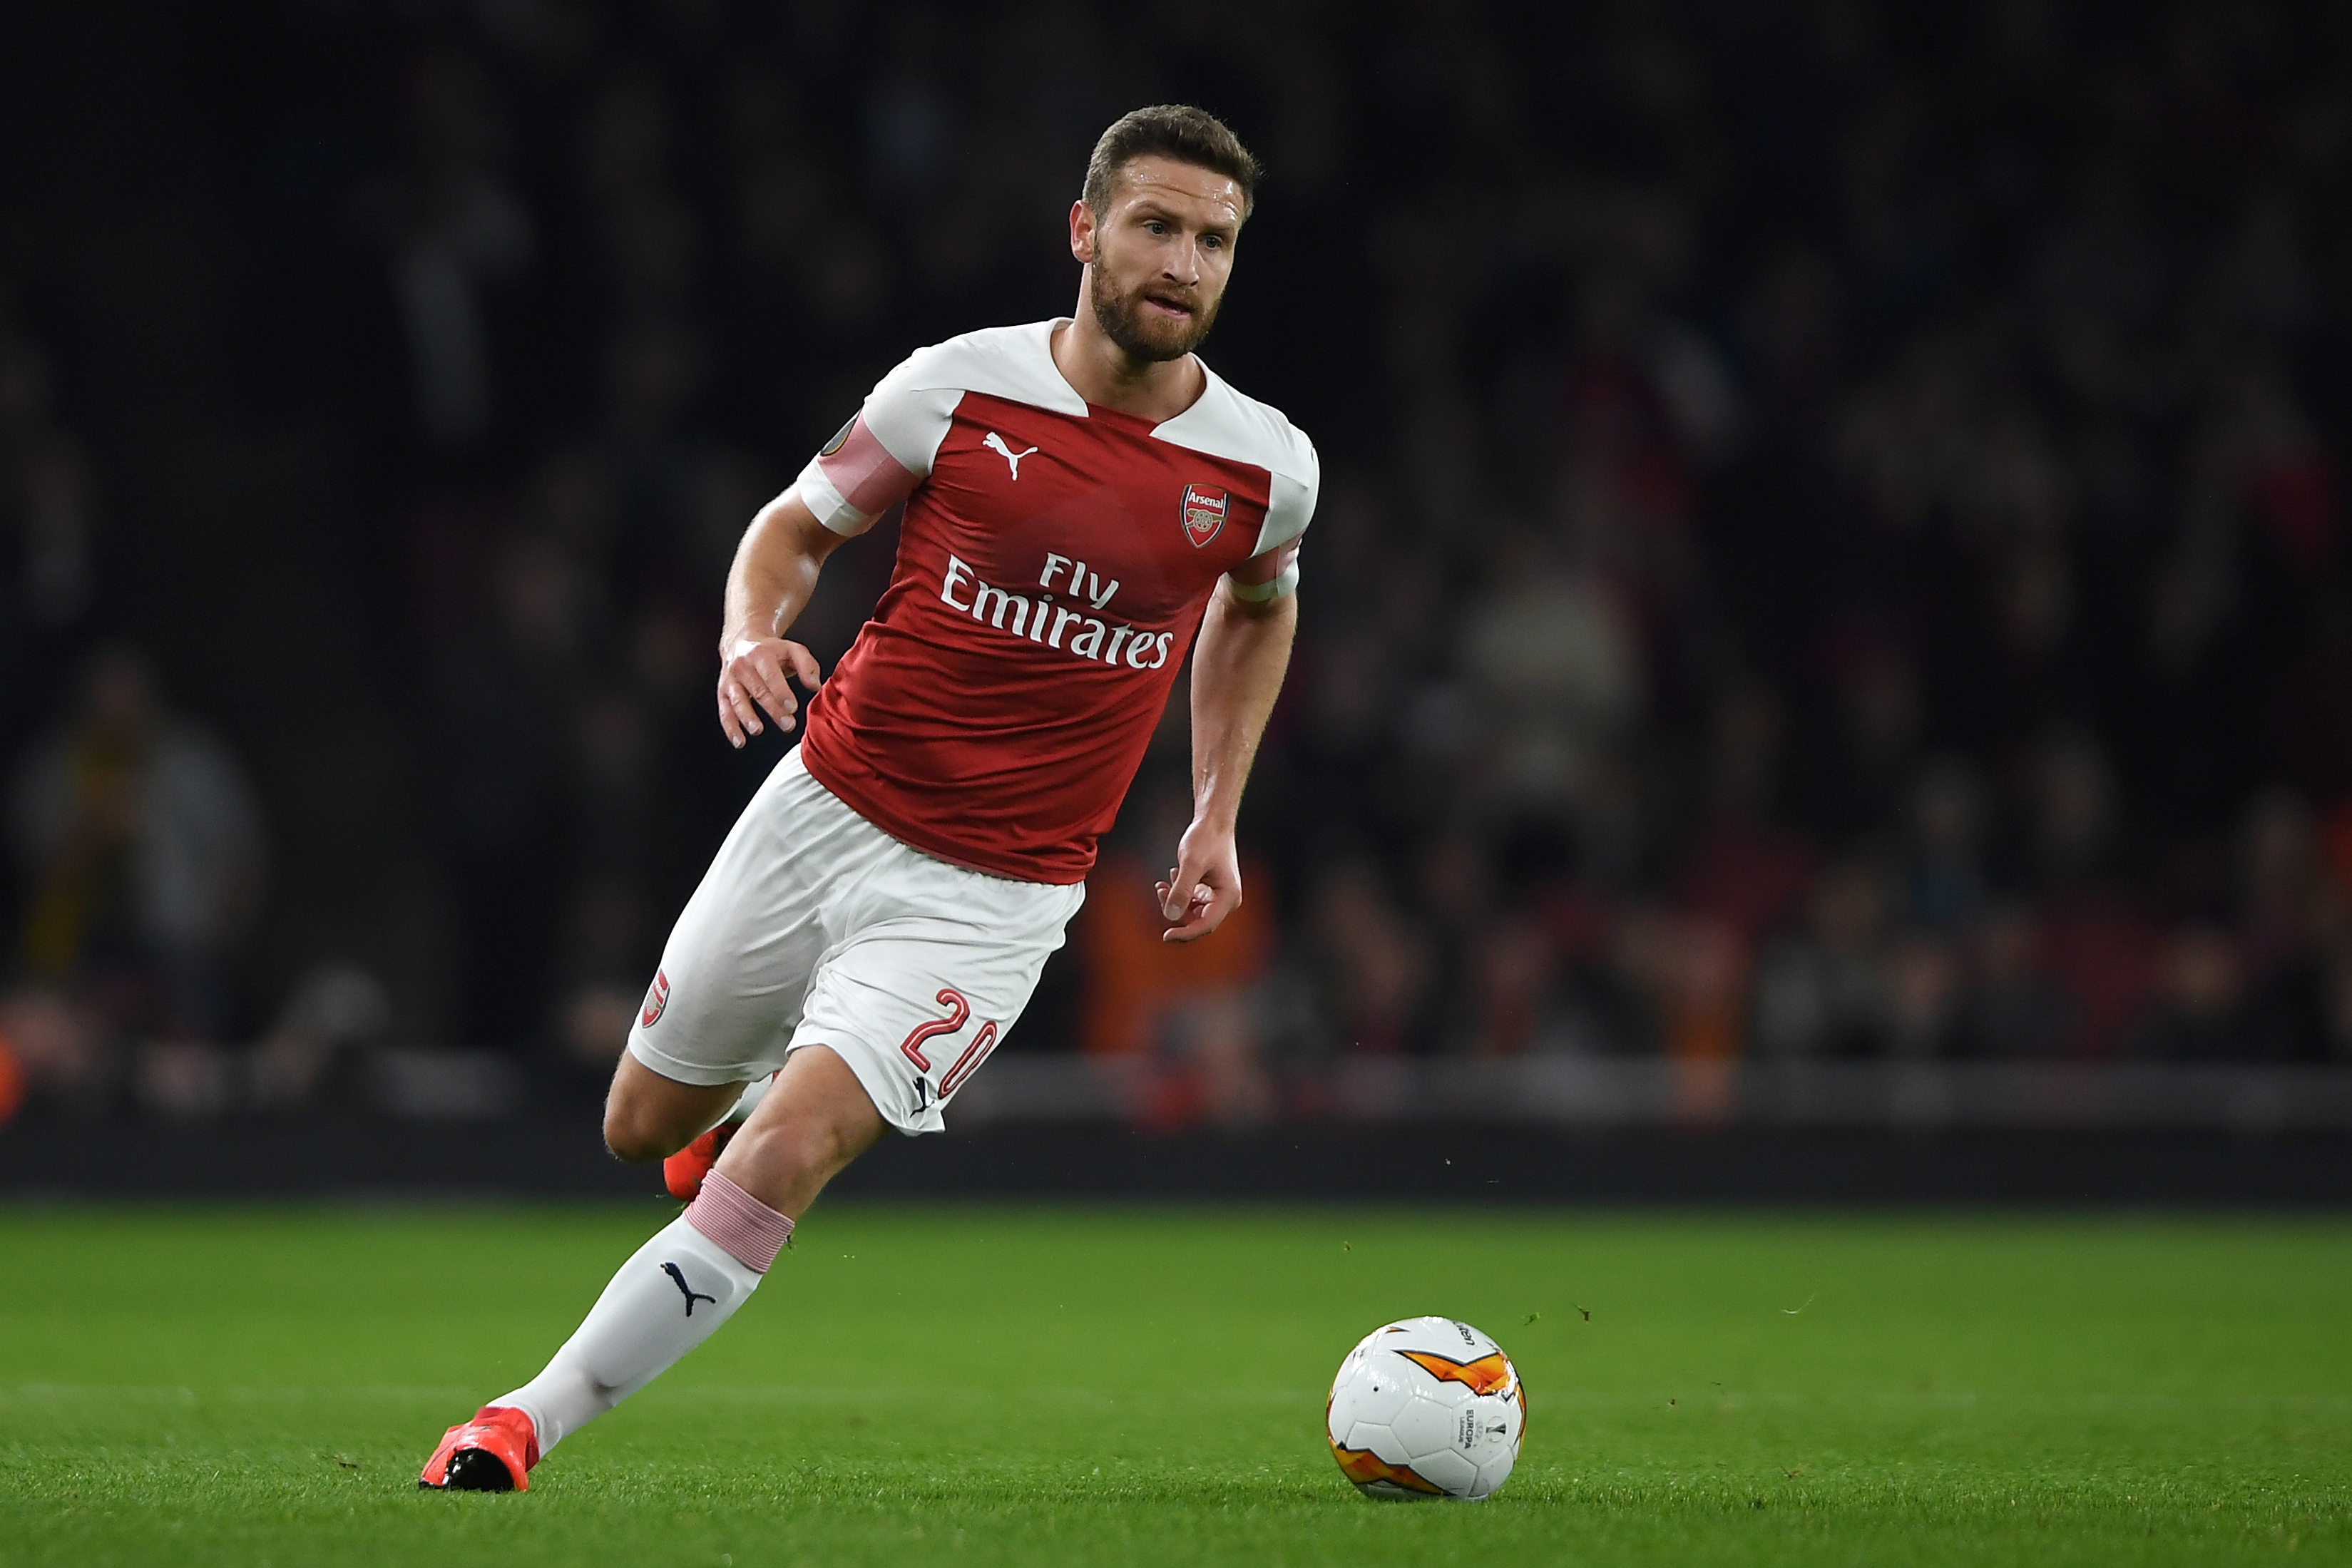 Mustafi's time at Arsenal could come to an end in the summer. (Photo by Mike Hewitt/Getty Images)